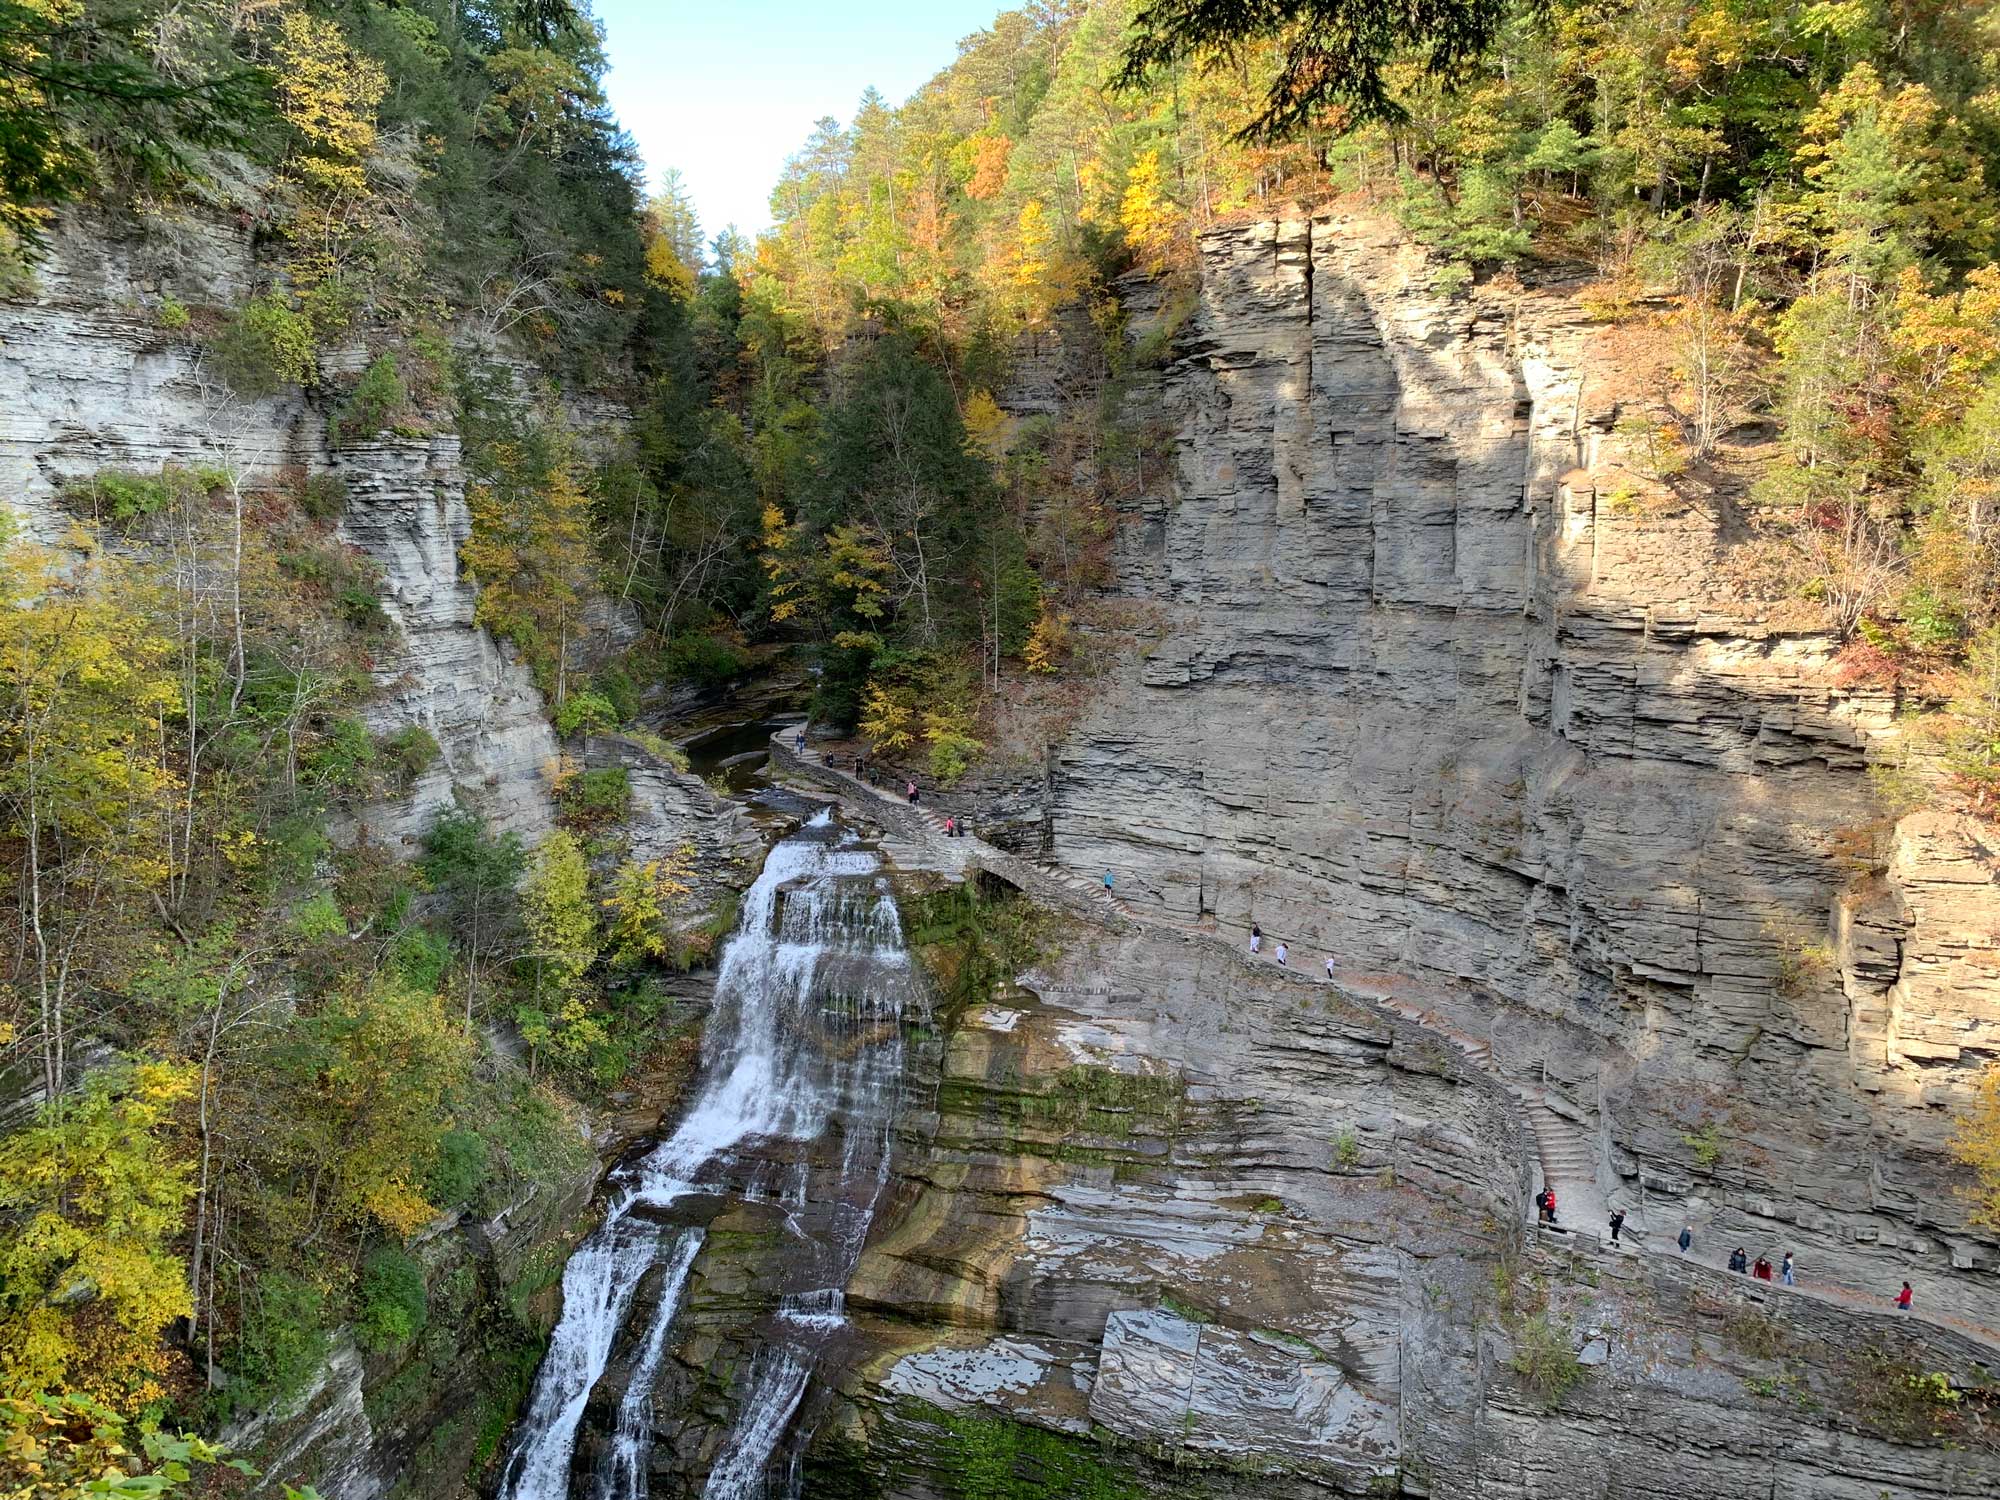 Photograph of Lucifer Falls in Robert H. Treman State Park, Tompkins County, New York.